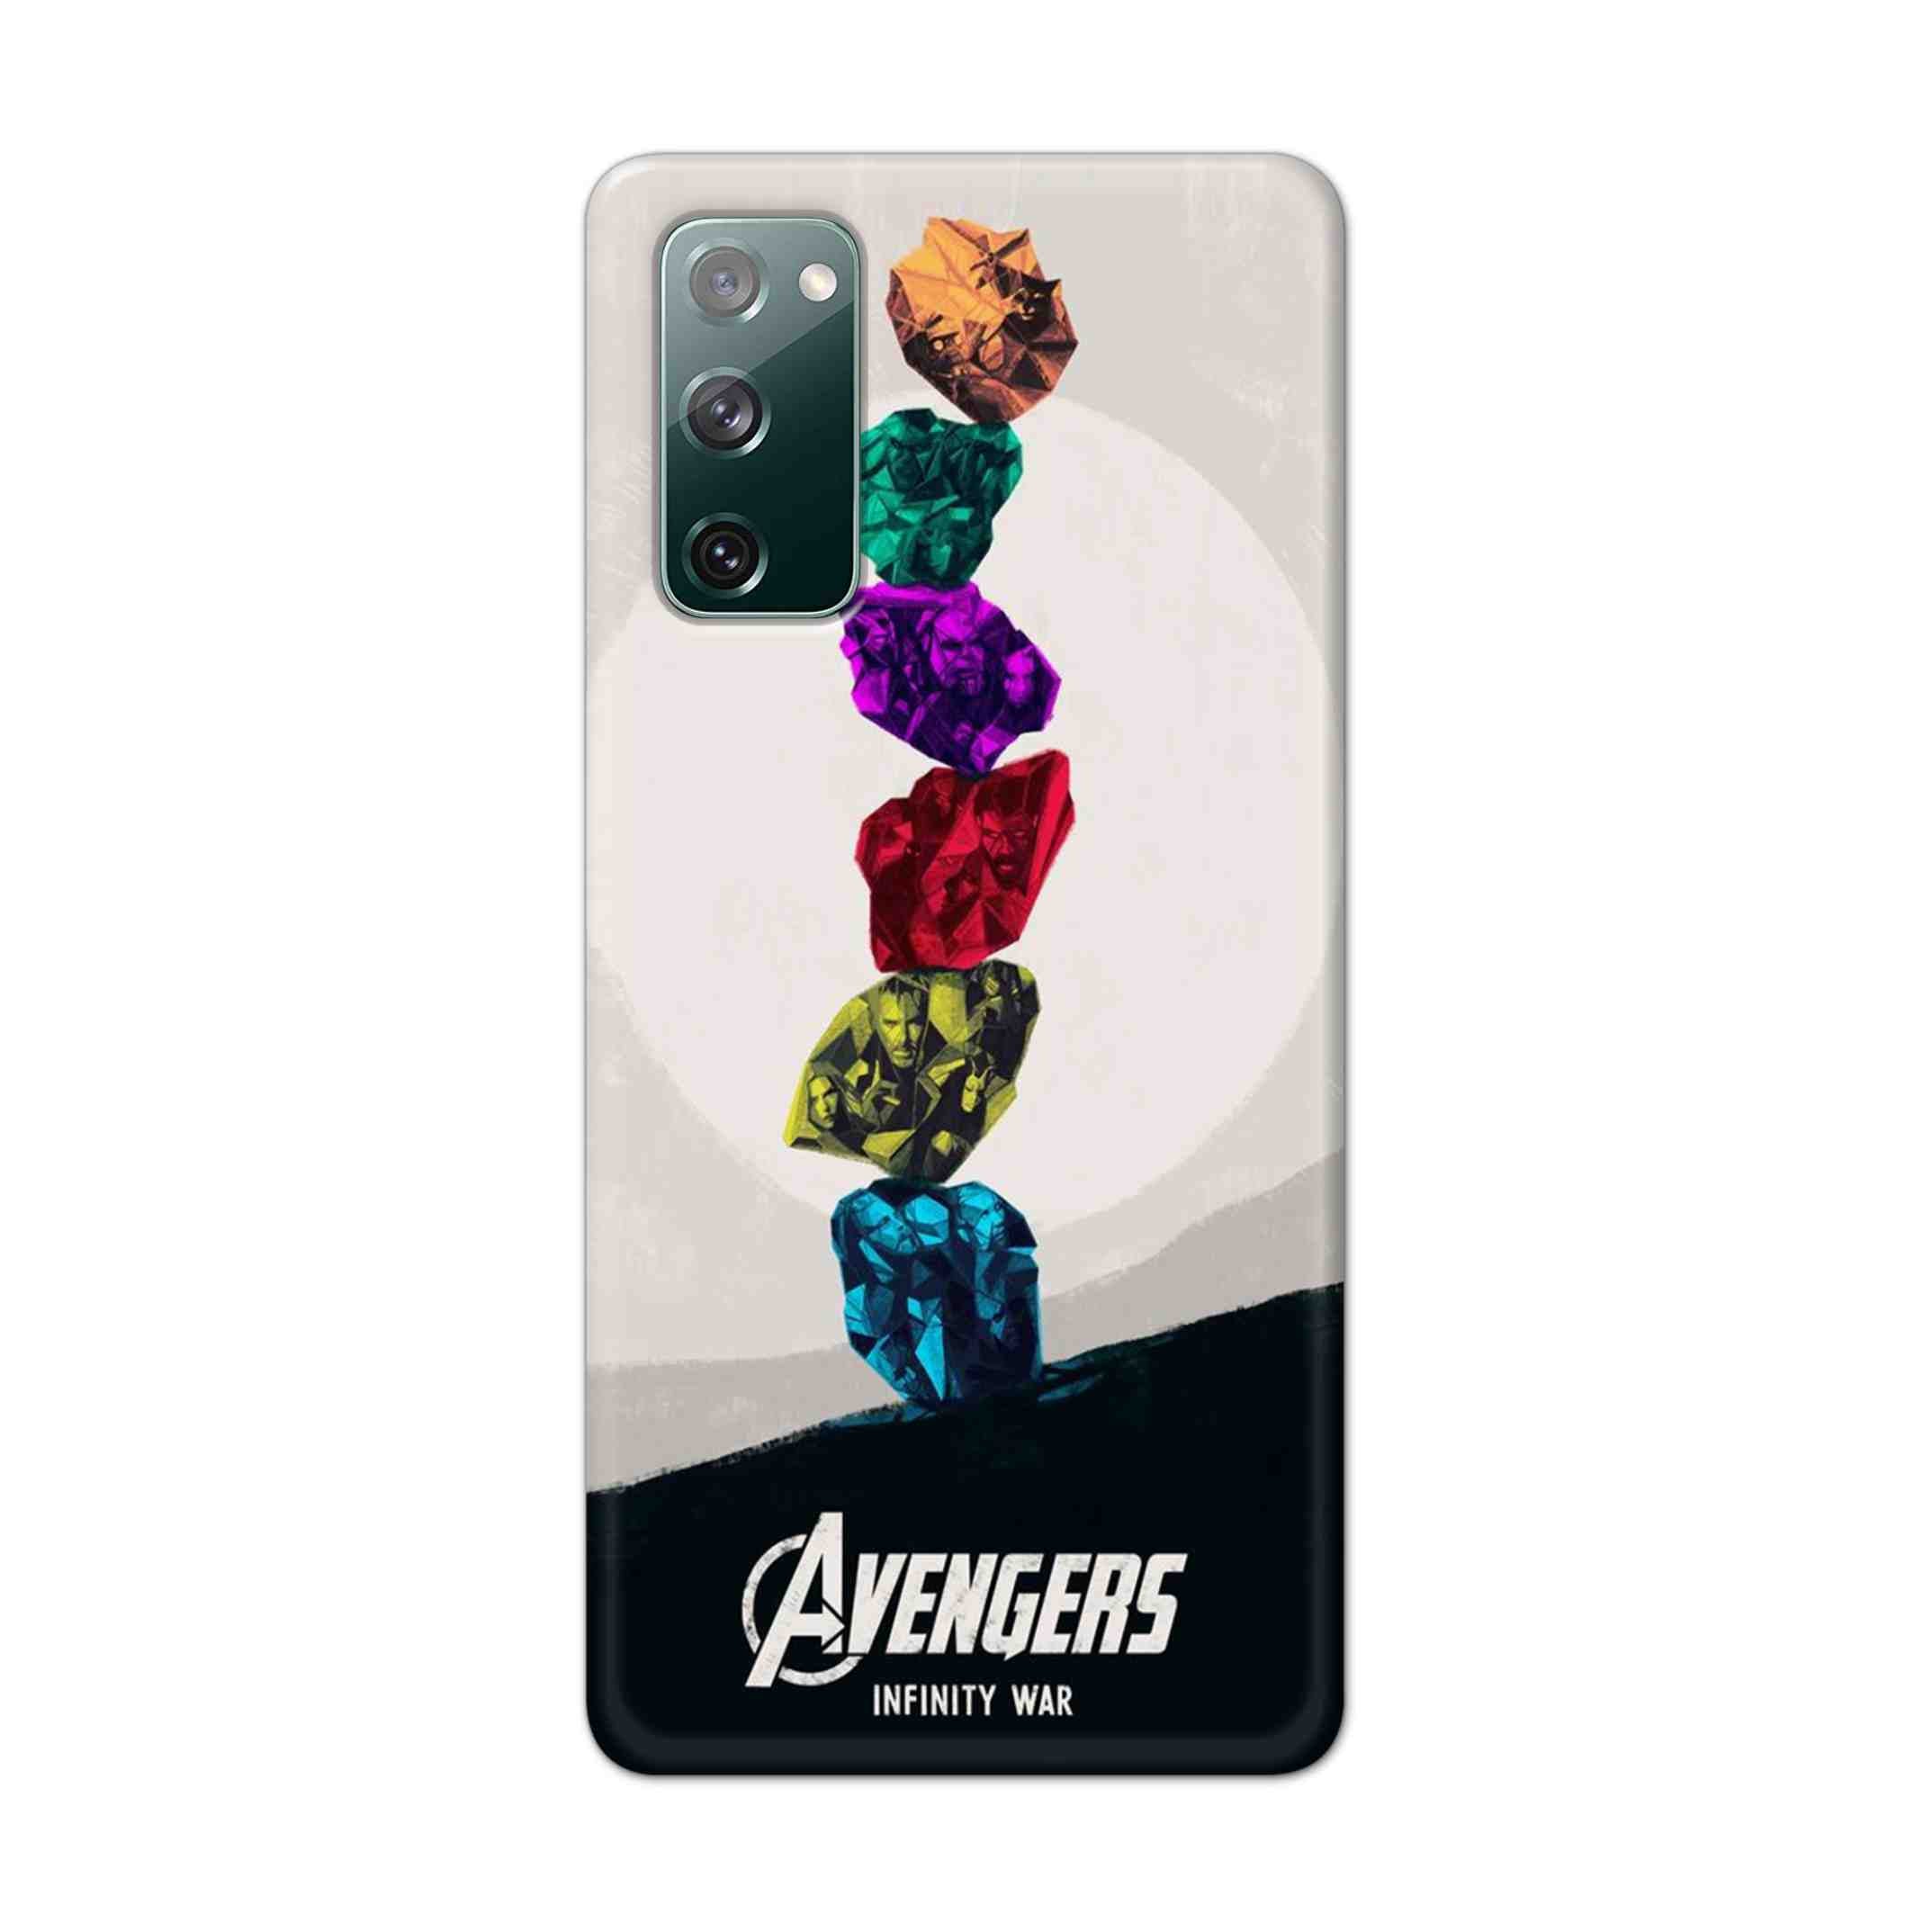 Buy Avengers Stone Hard Back Mobile Phone Case Cover For Samsung Galaxy S20 FE Online